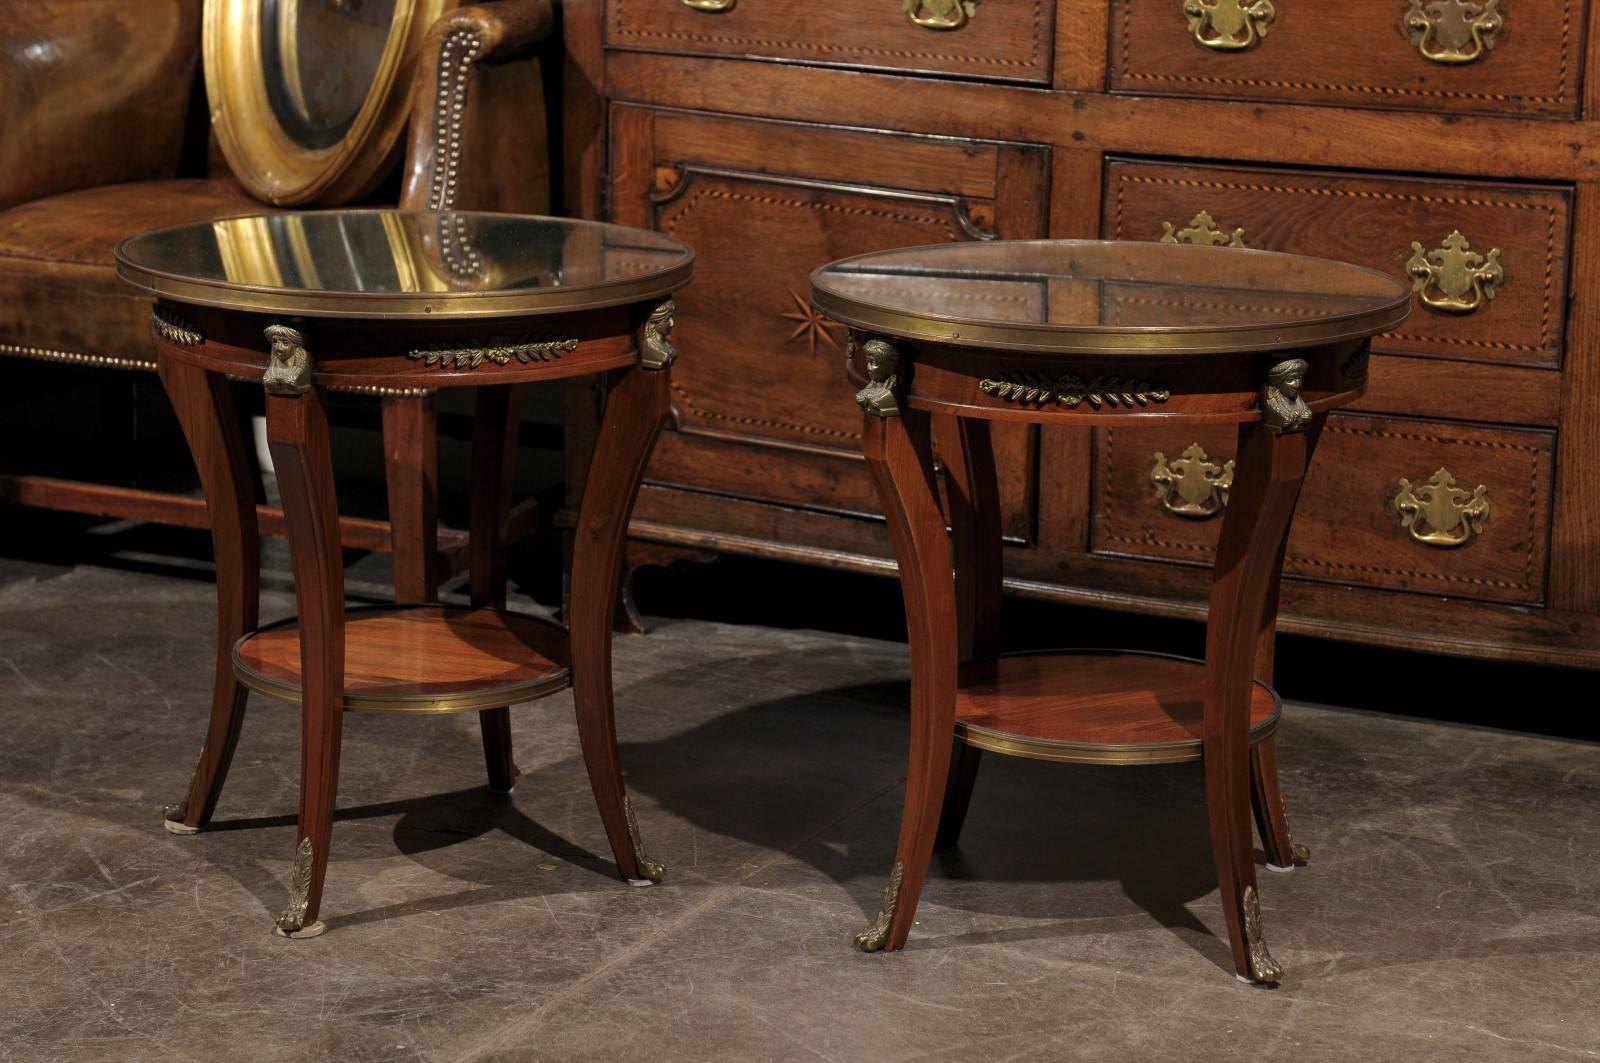 A pair of French Empire style accent tables from the early 20th century. Each table features a circular top of round shape set into a brass frame. The aprons are decorated with bronze motifs, typical of the Empire style, accentuated by the presence